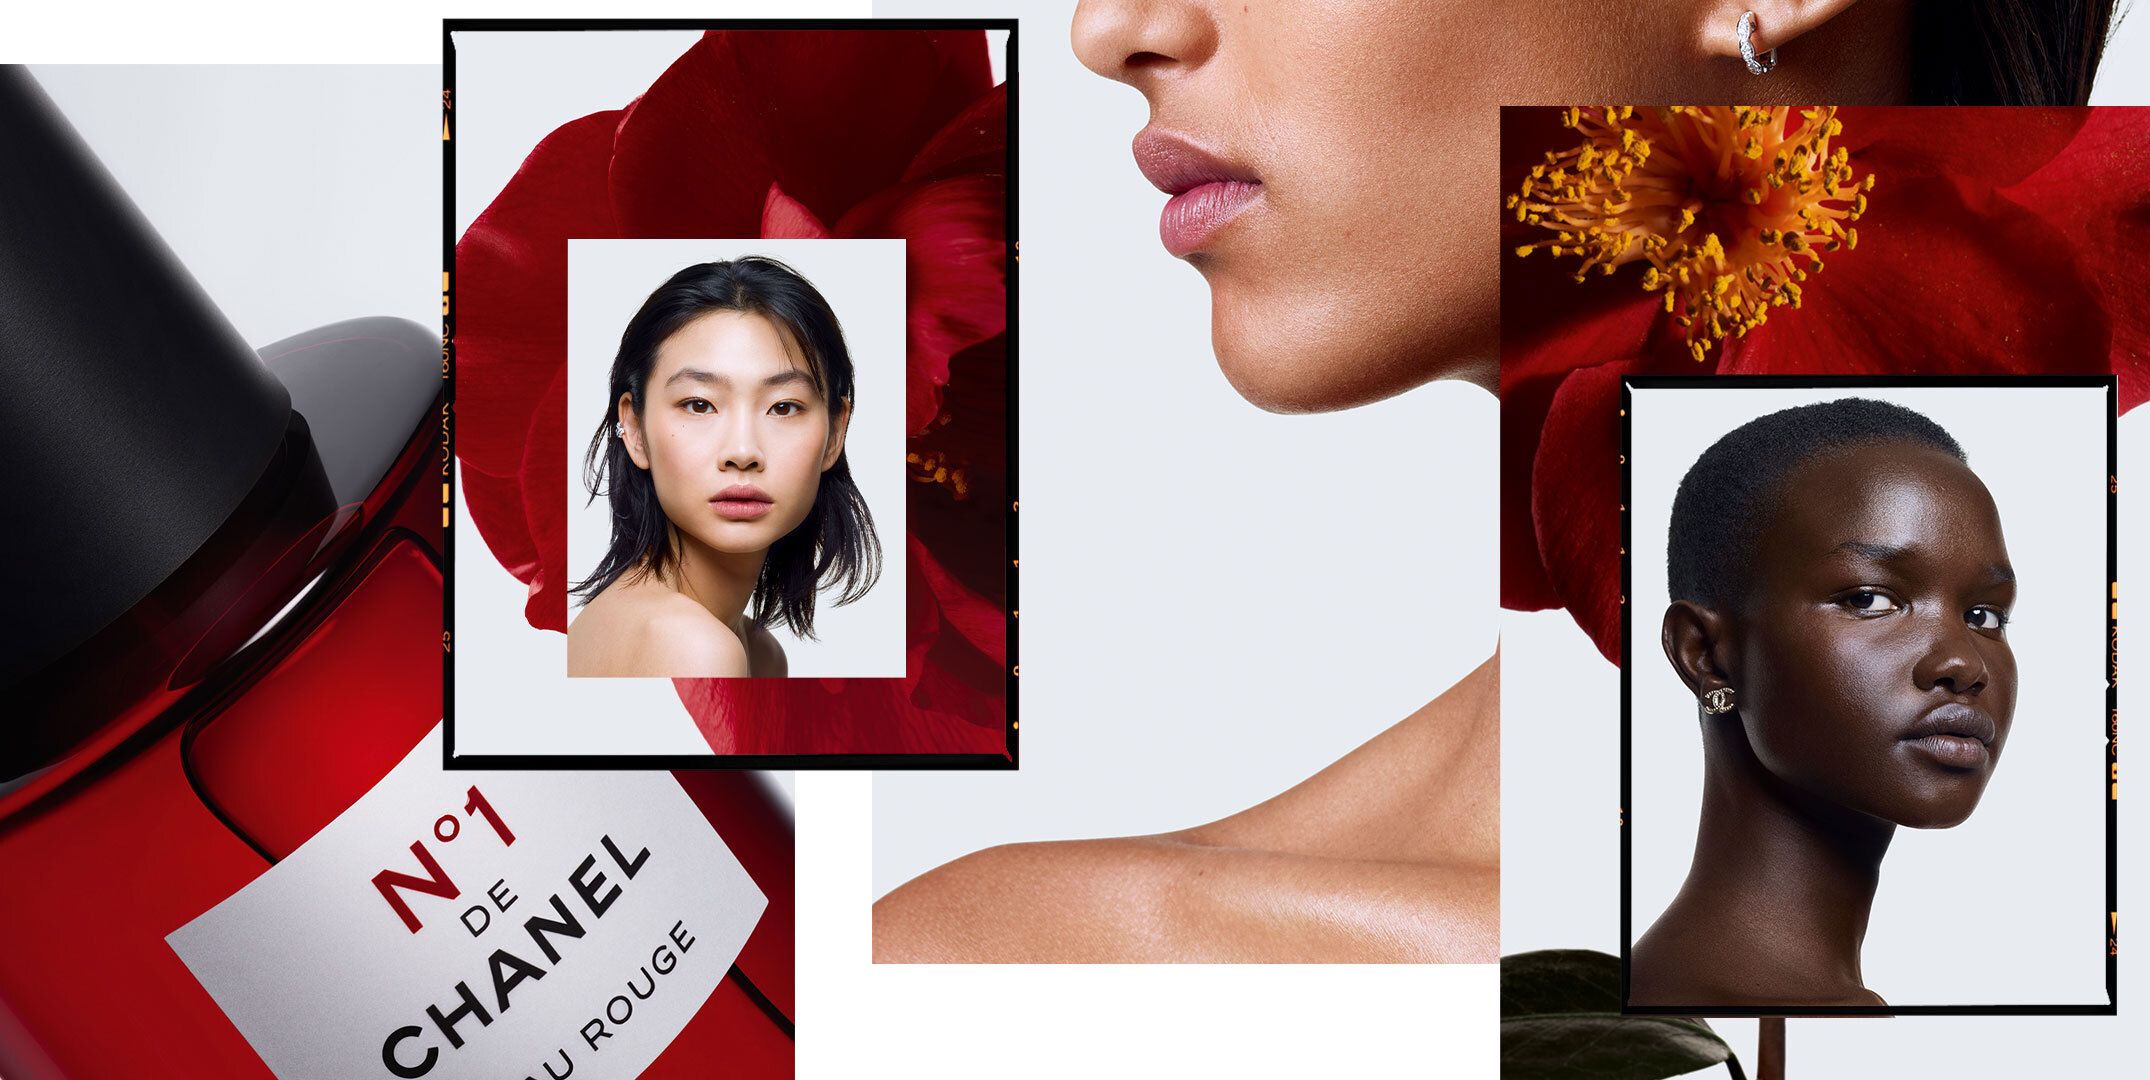 Chanel No.1 Beauty: Skin, Makeup And Fragrance